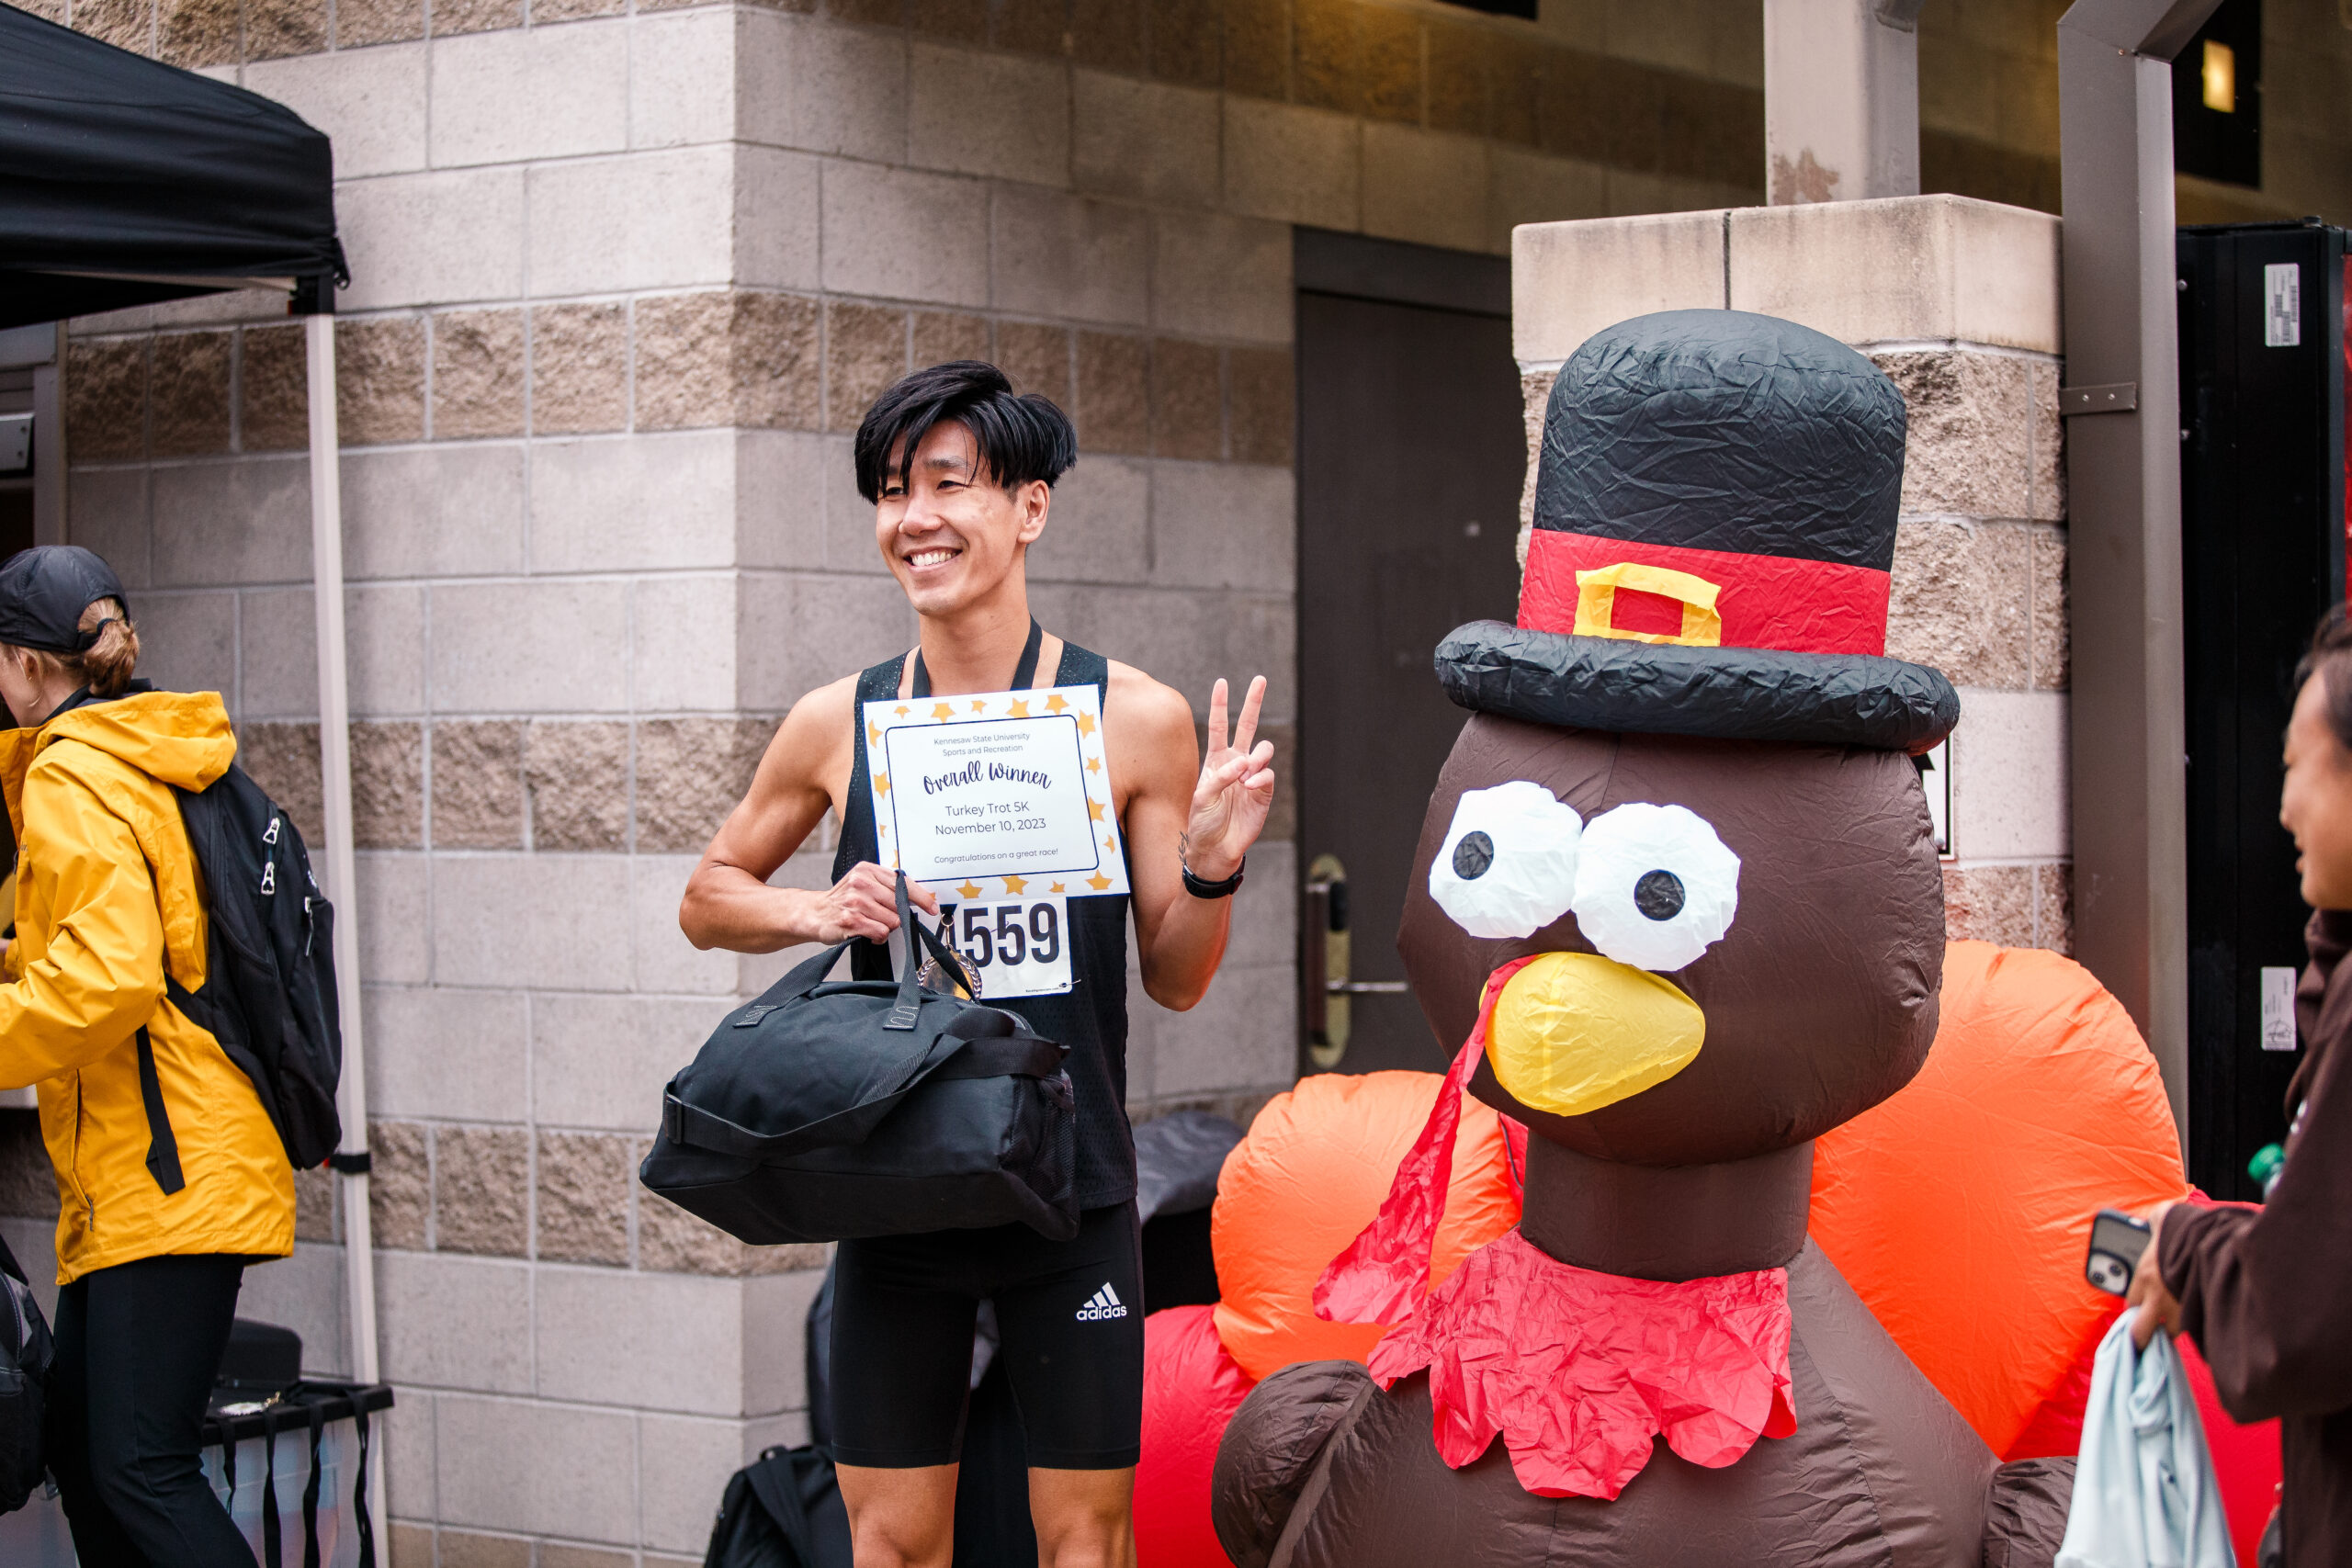 Annual Turkey Trot 5K supports students facing food, housing insecurity